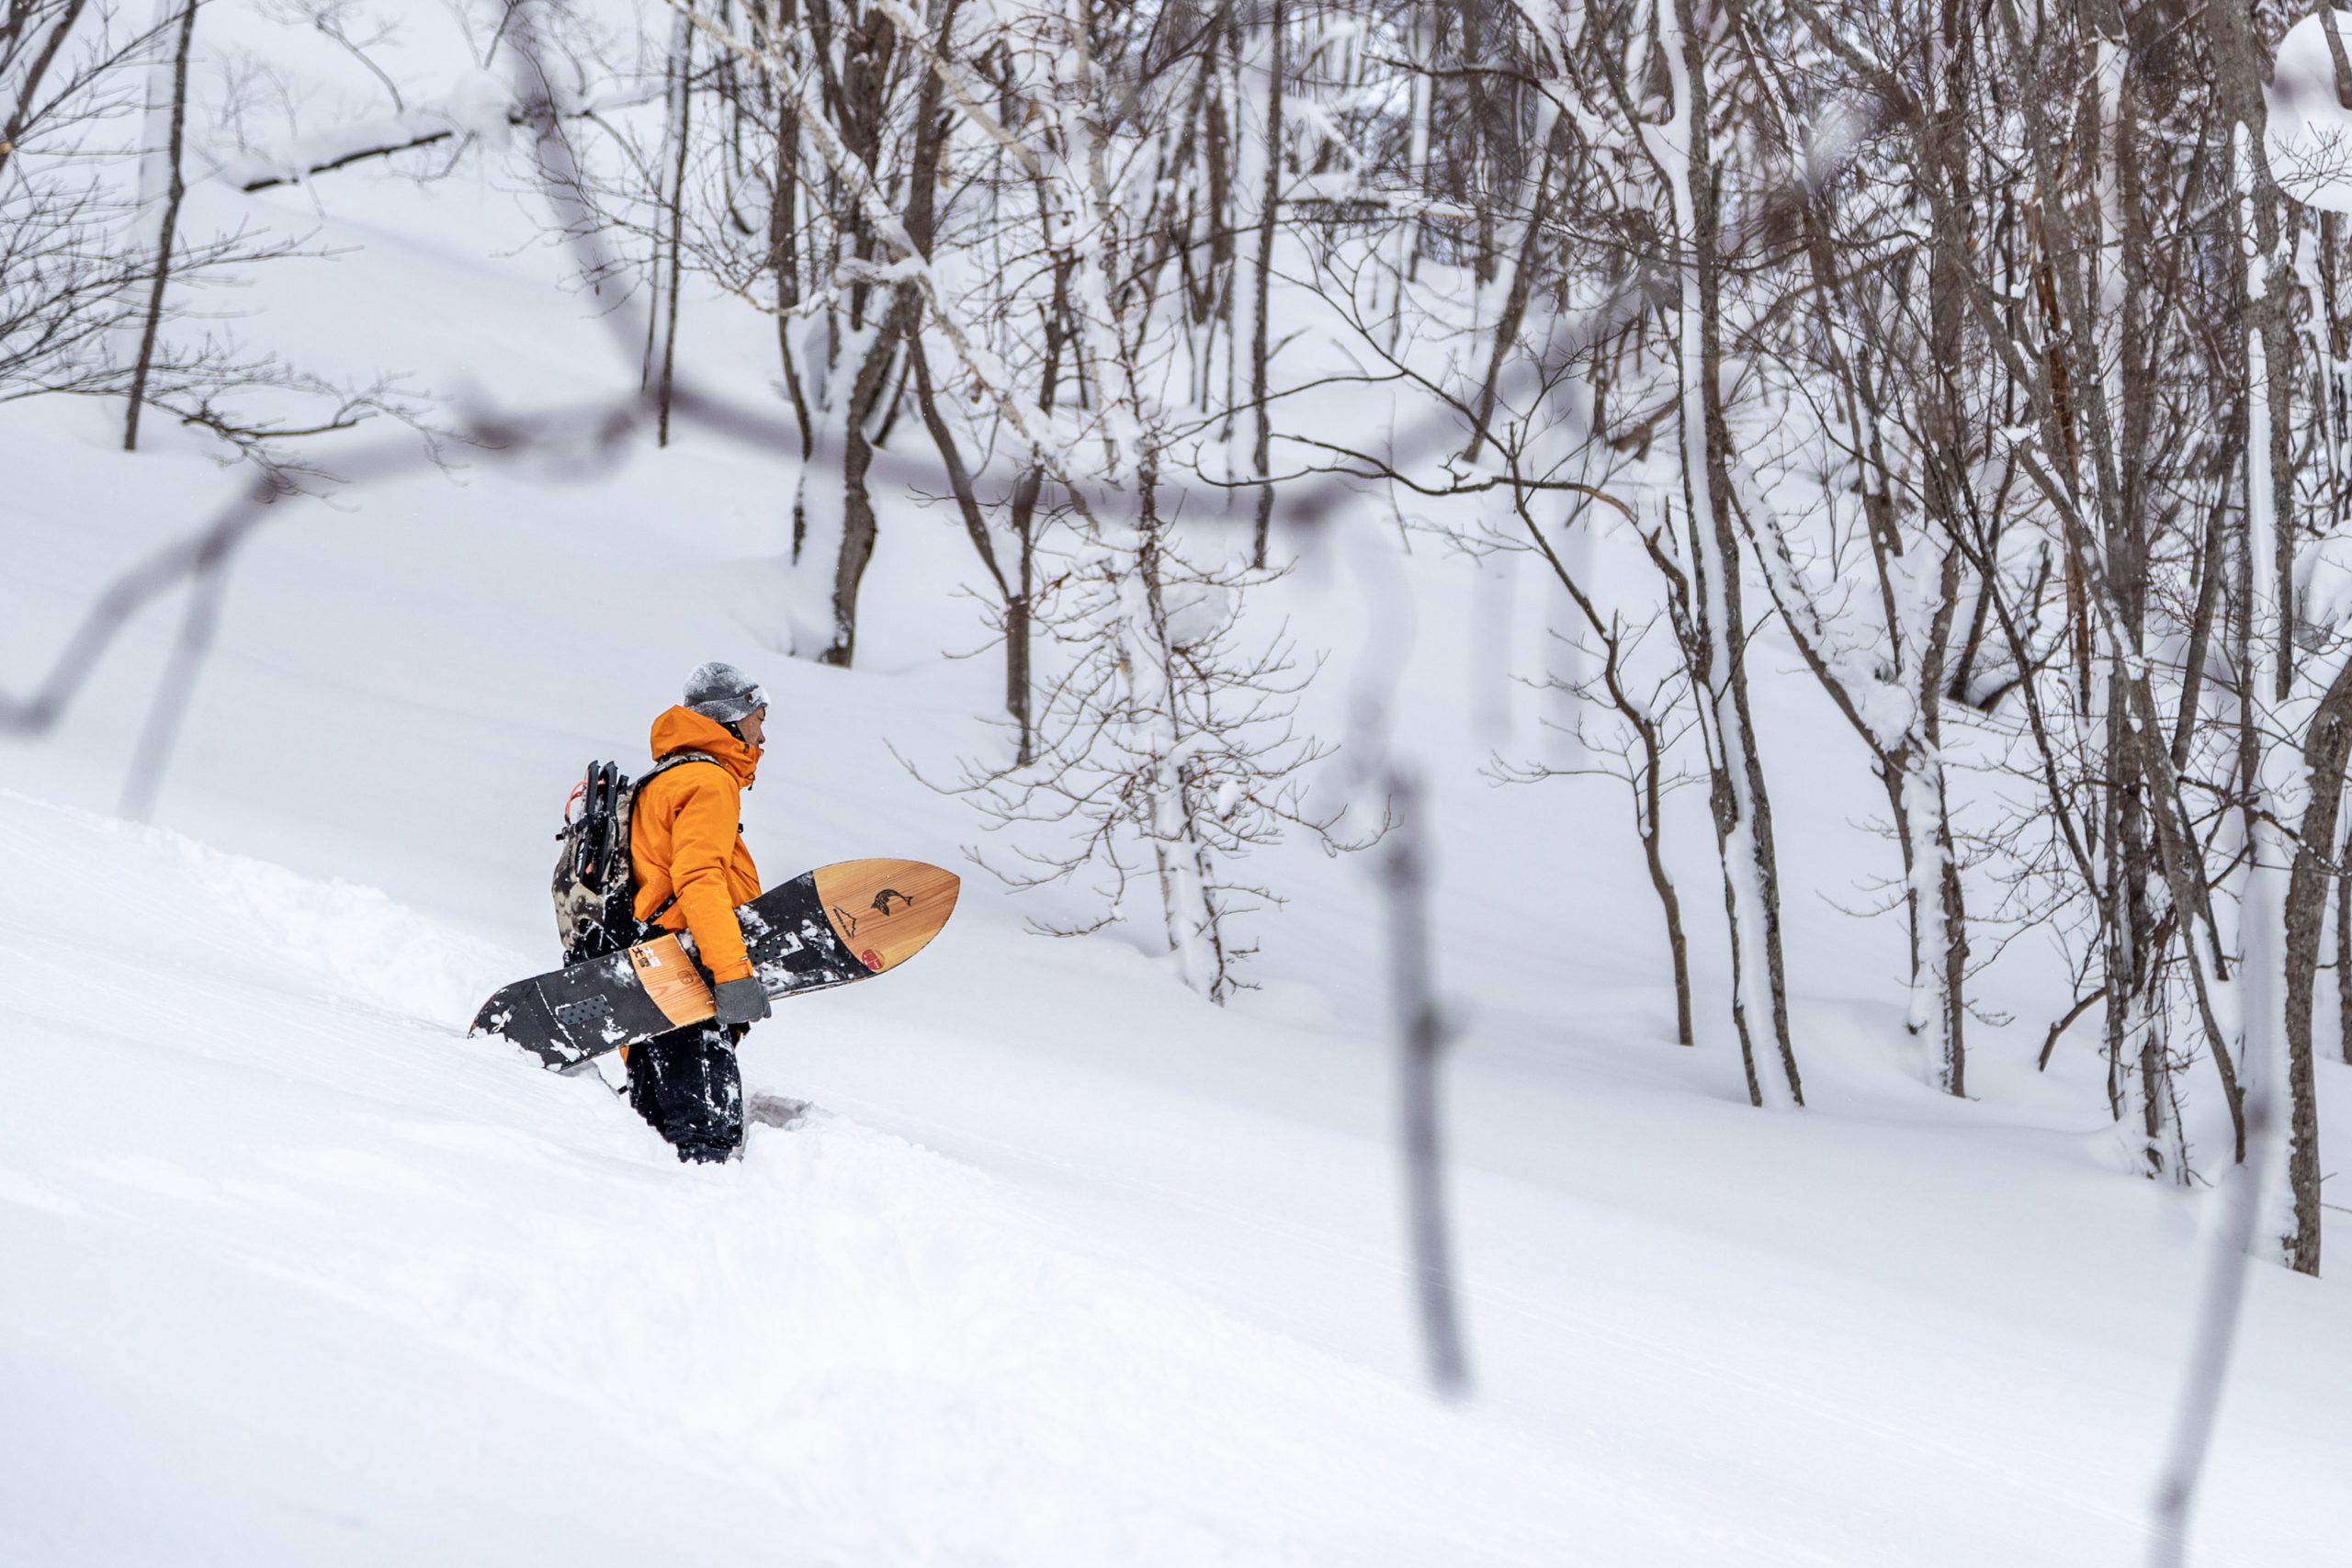 Toshiya Kasuga putting our products to the test in the Niseko backcountry